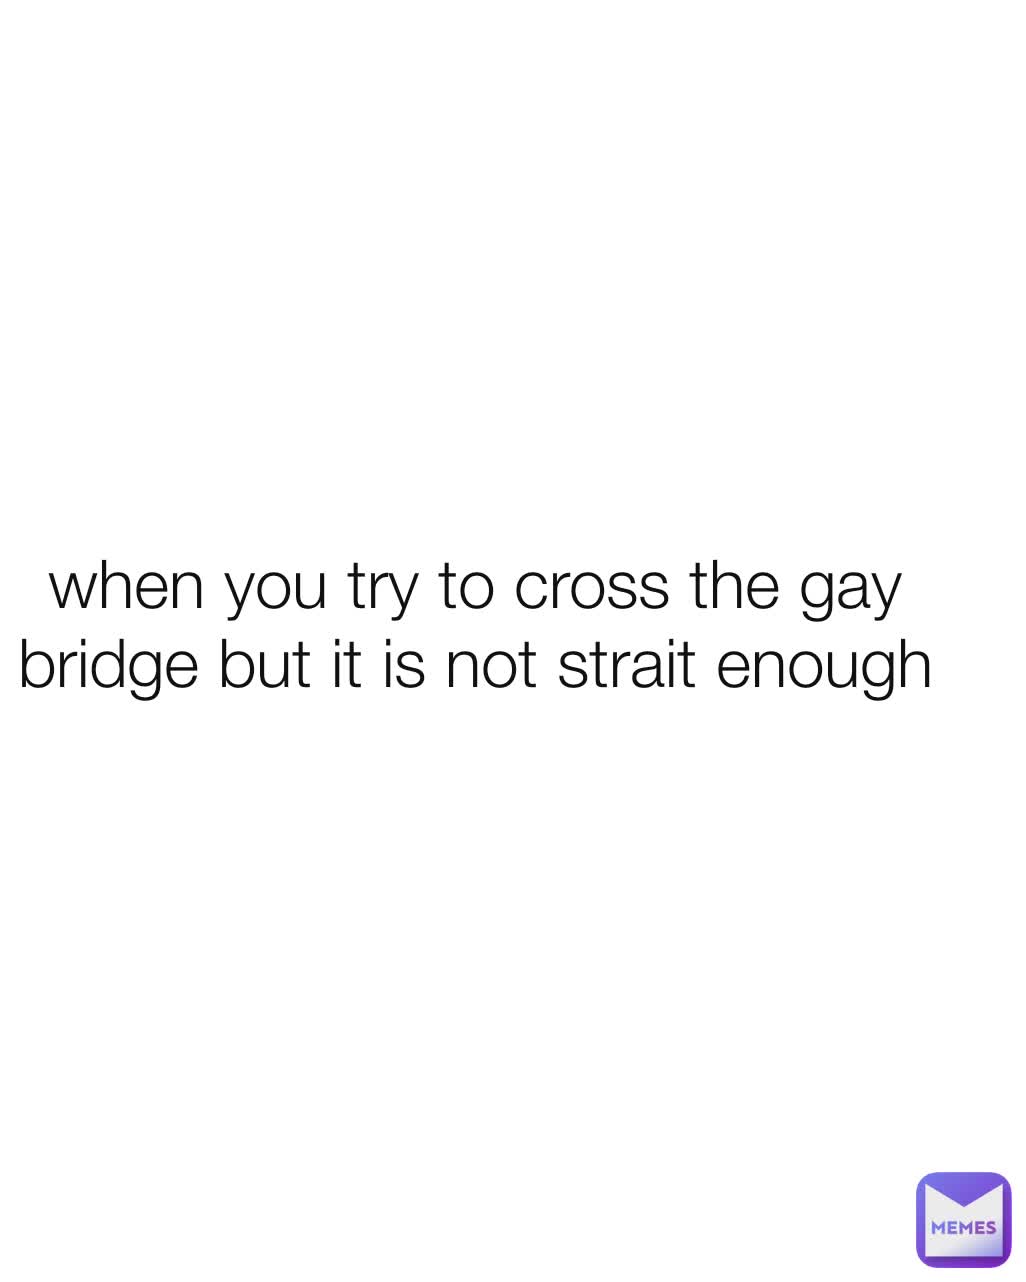 when you try to cross the gay bridge but it is not strait enough
